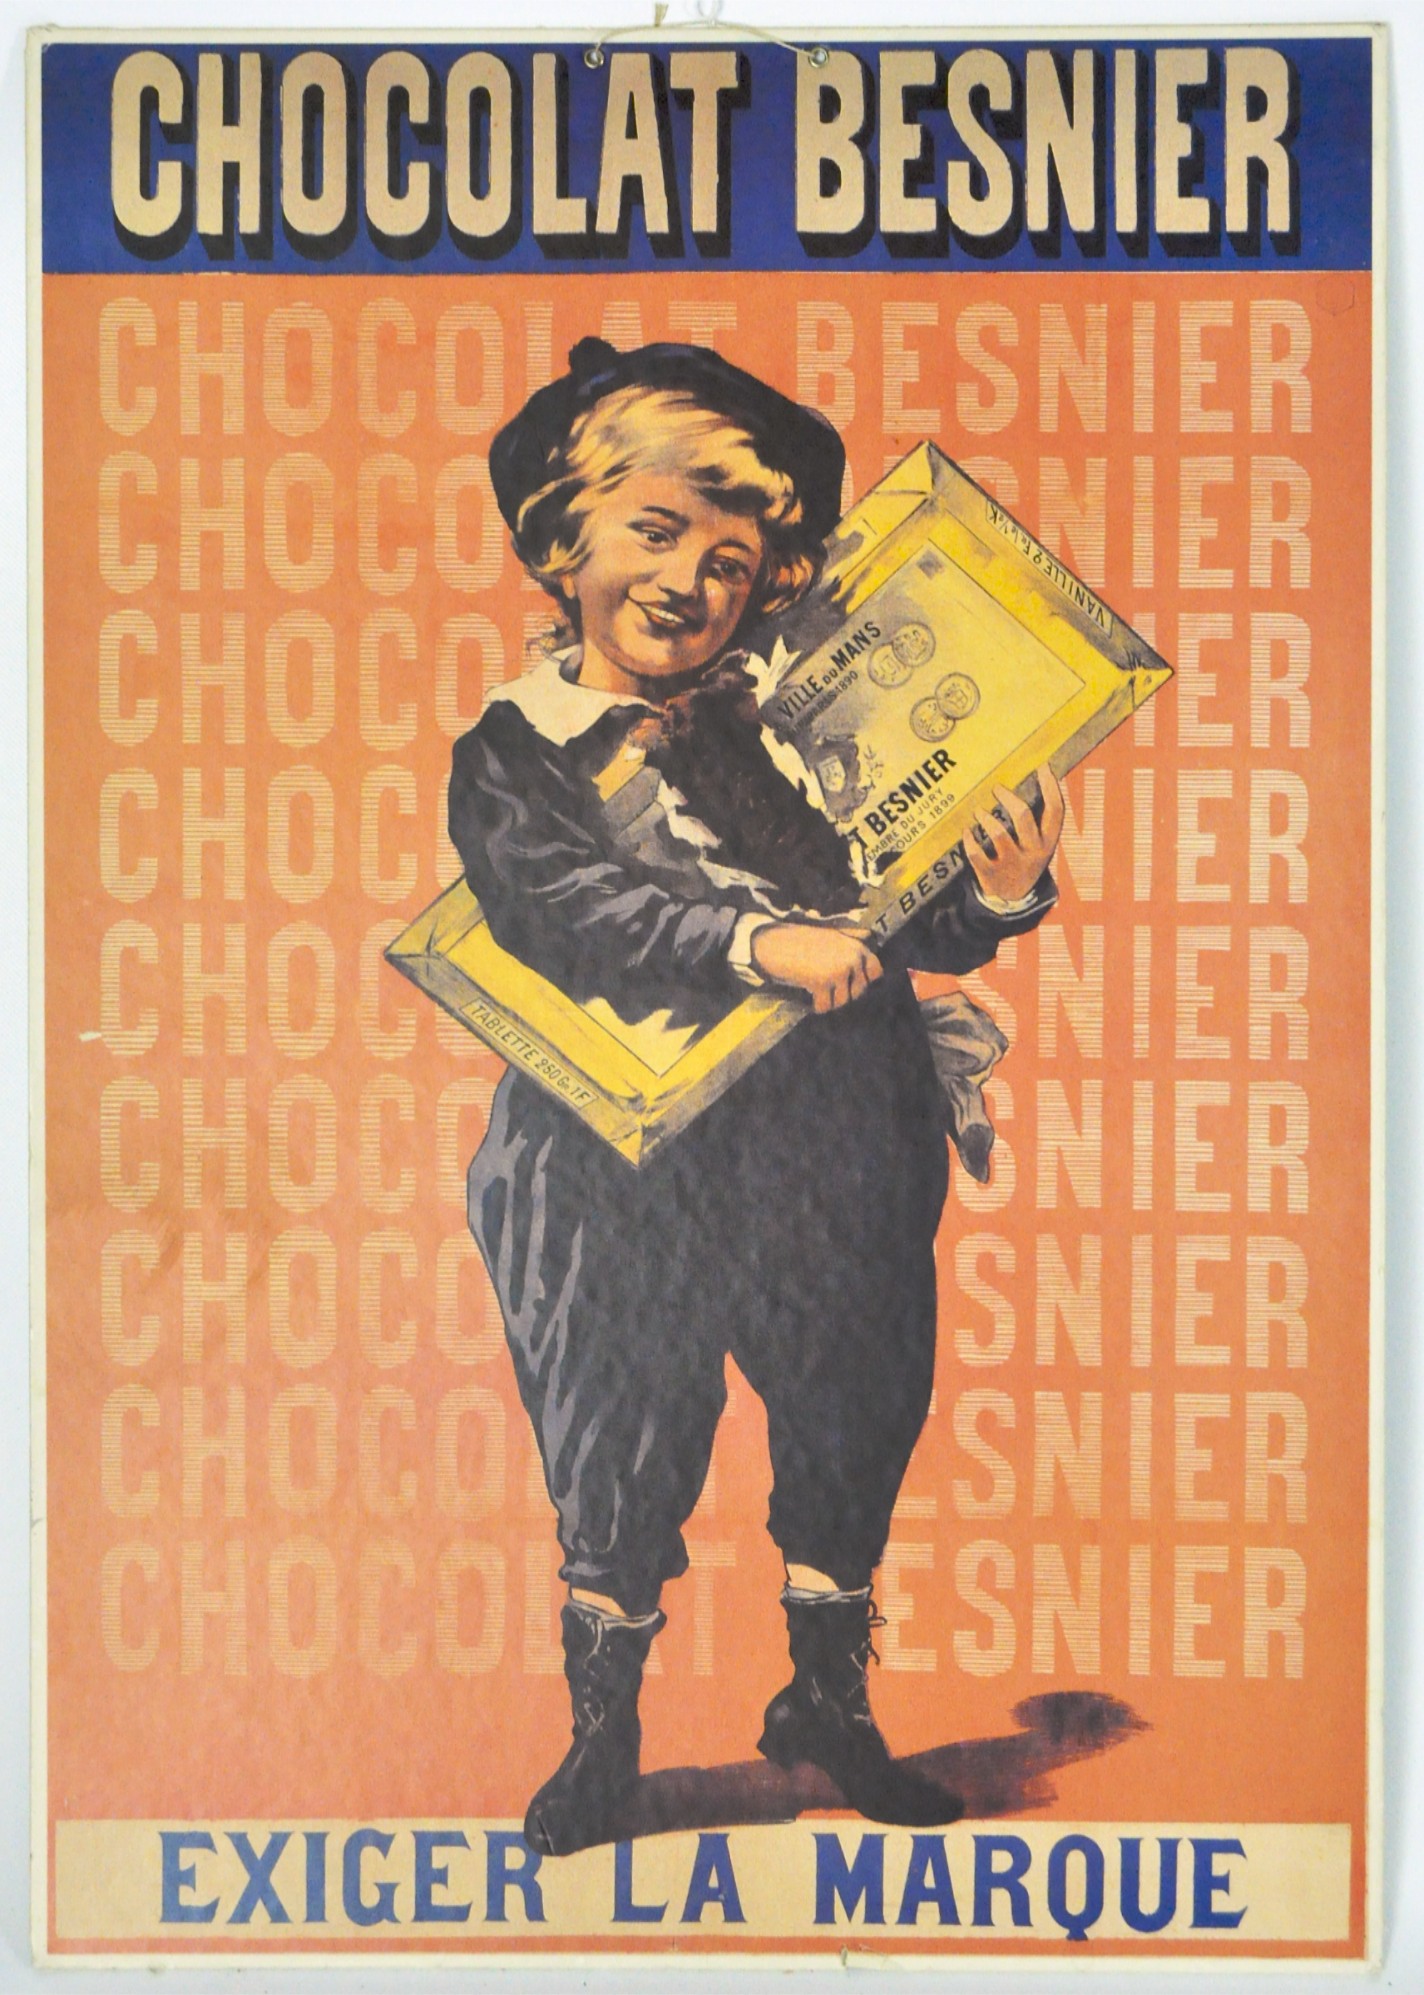 A Chocolate Besnier advert offset print on card featuring a young boy holding a bar of chocolate